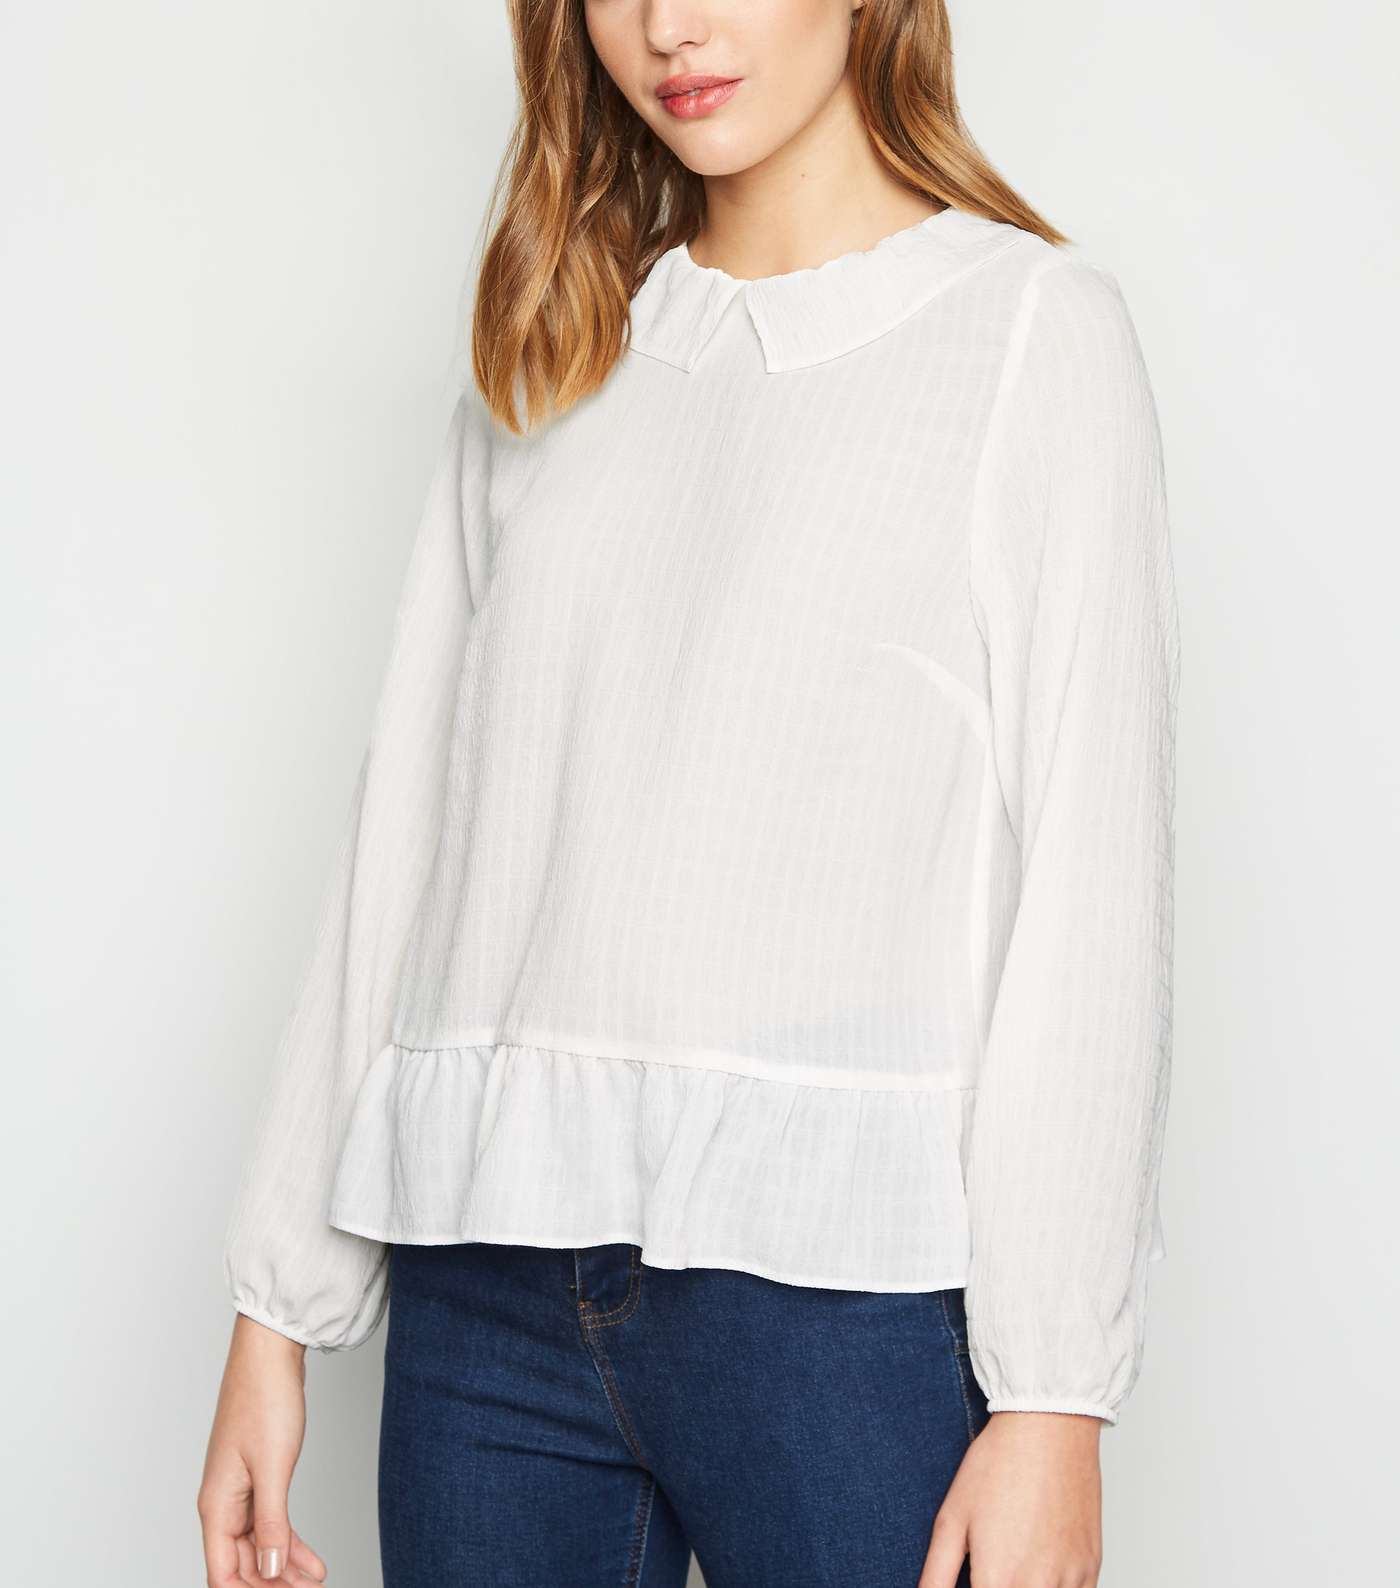 Off White Textured Collared Peplum Blouse